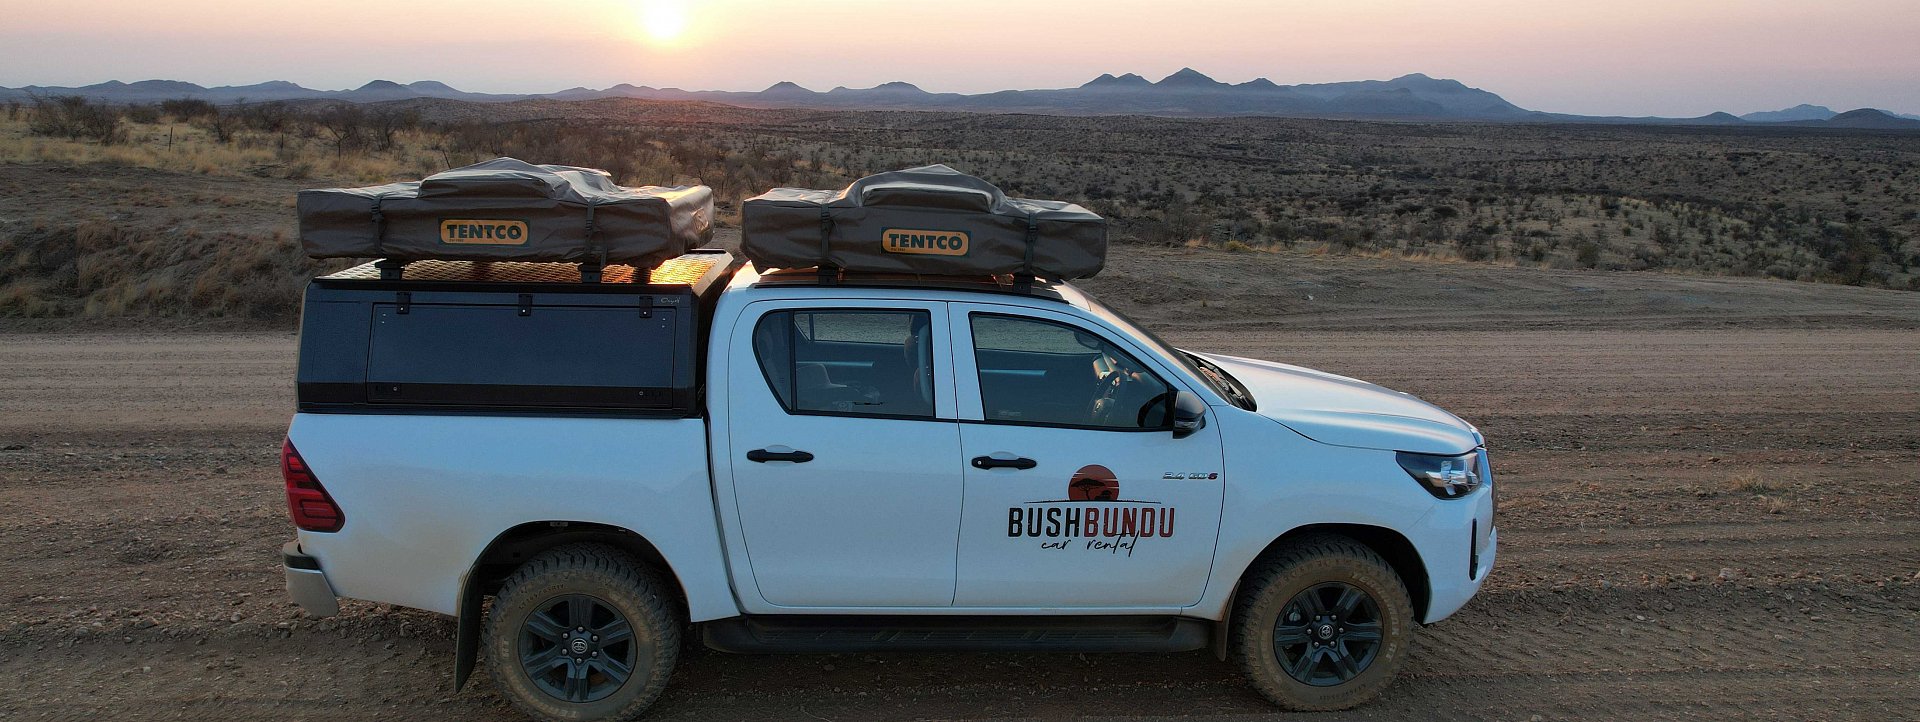 bushbundu-car-rental-windhoek-namibia-home-page-image-of-fully-equipped-with-camping-equipment-4x4-toyota-hilux-on-the-desert-side-view